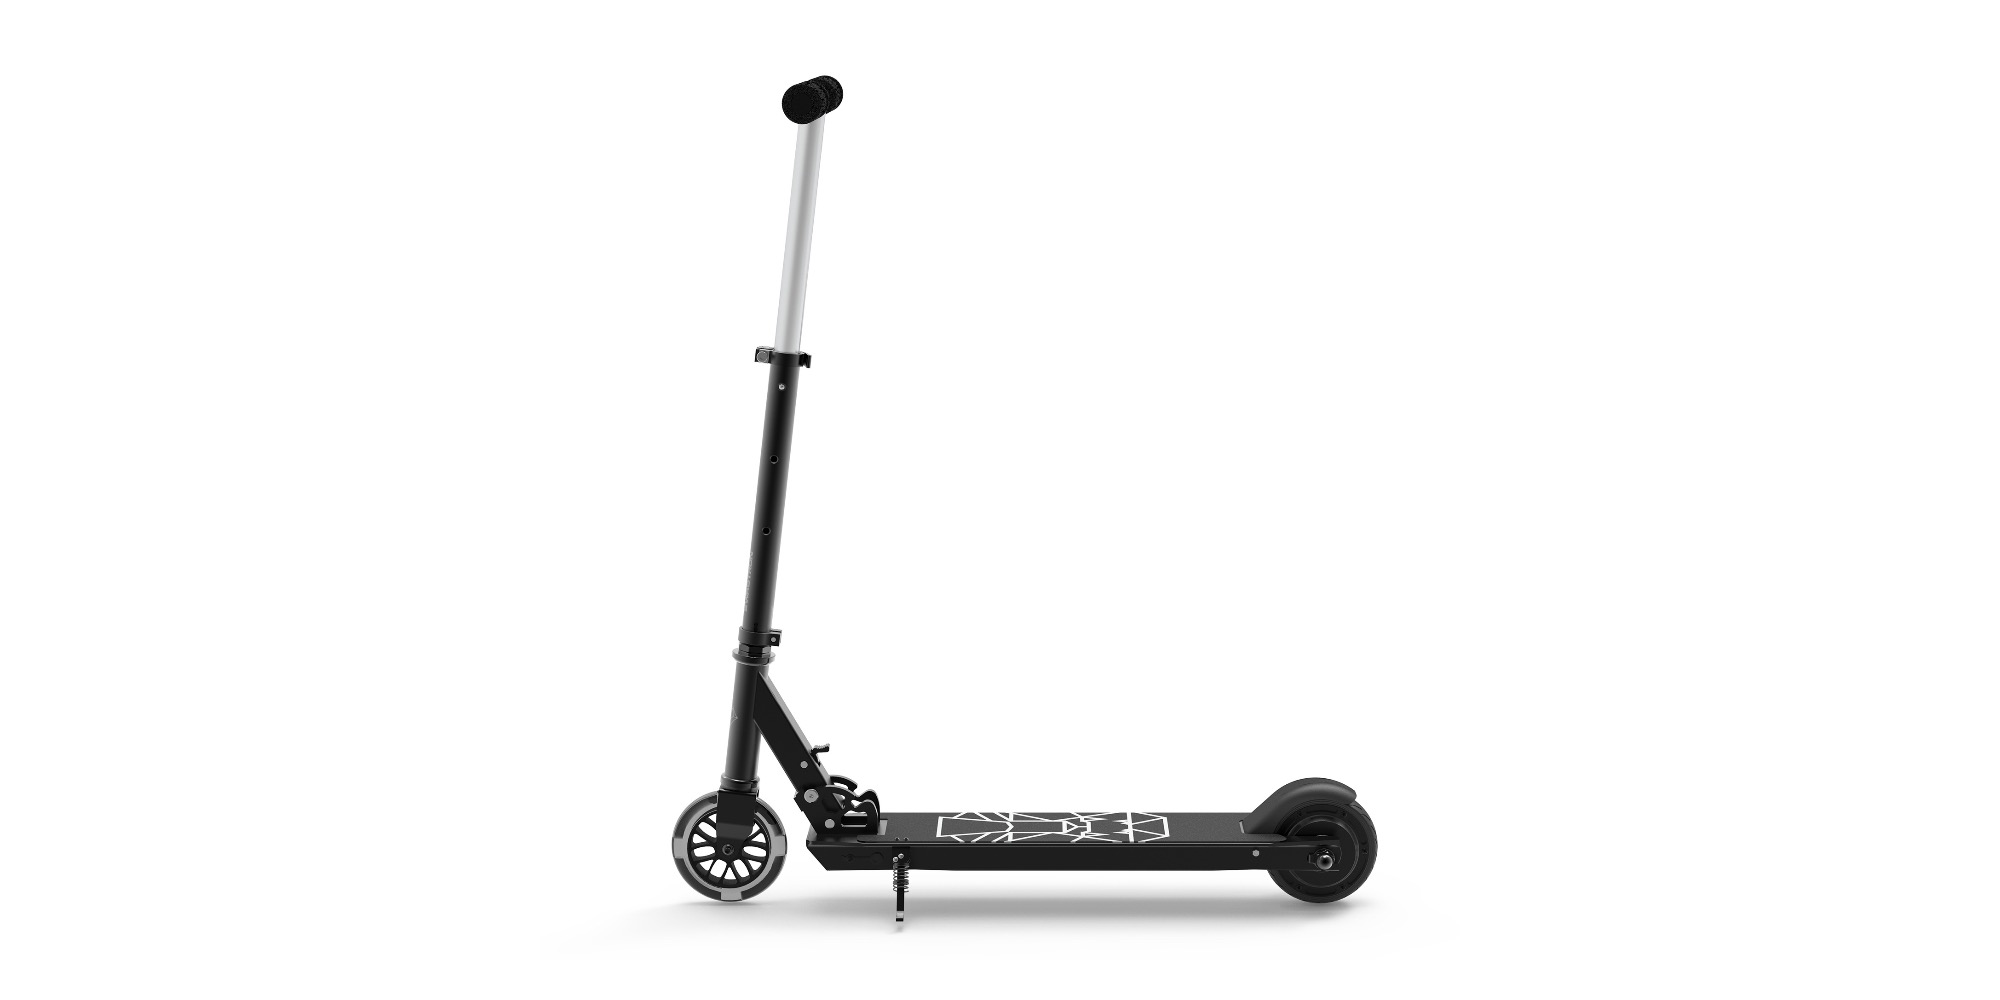 swagtron scooter best buy